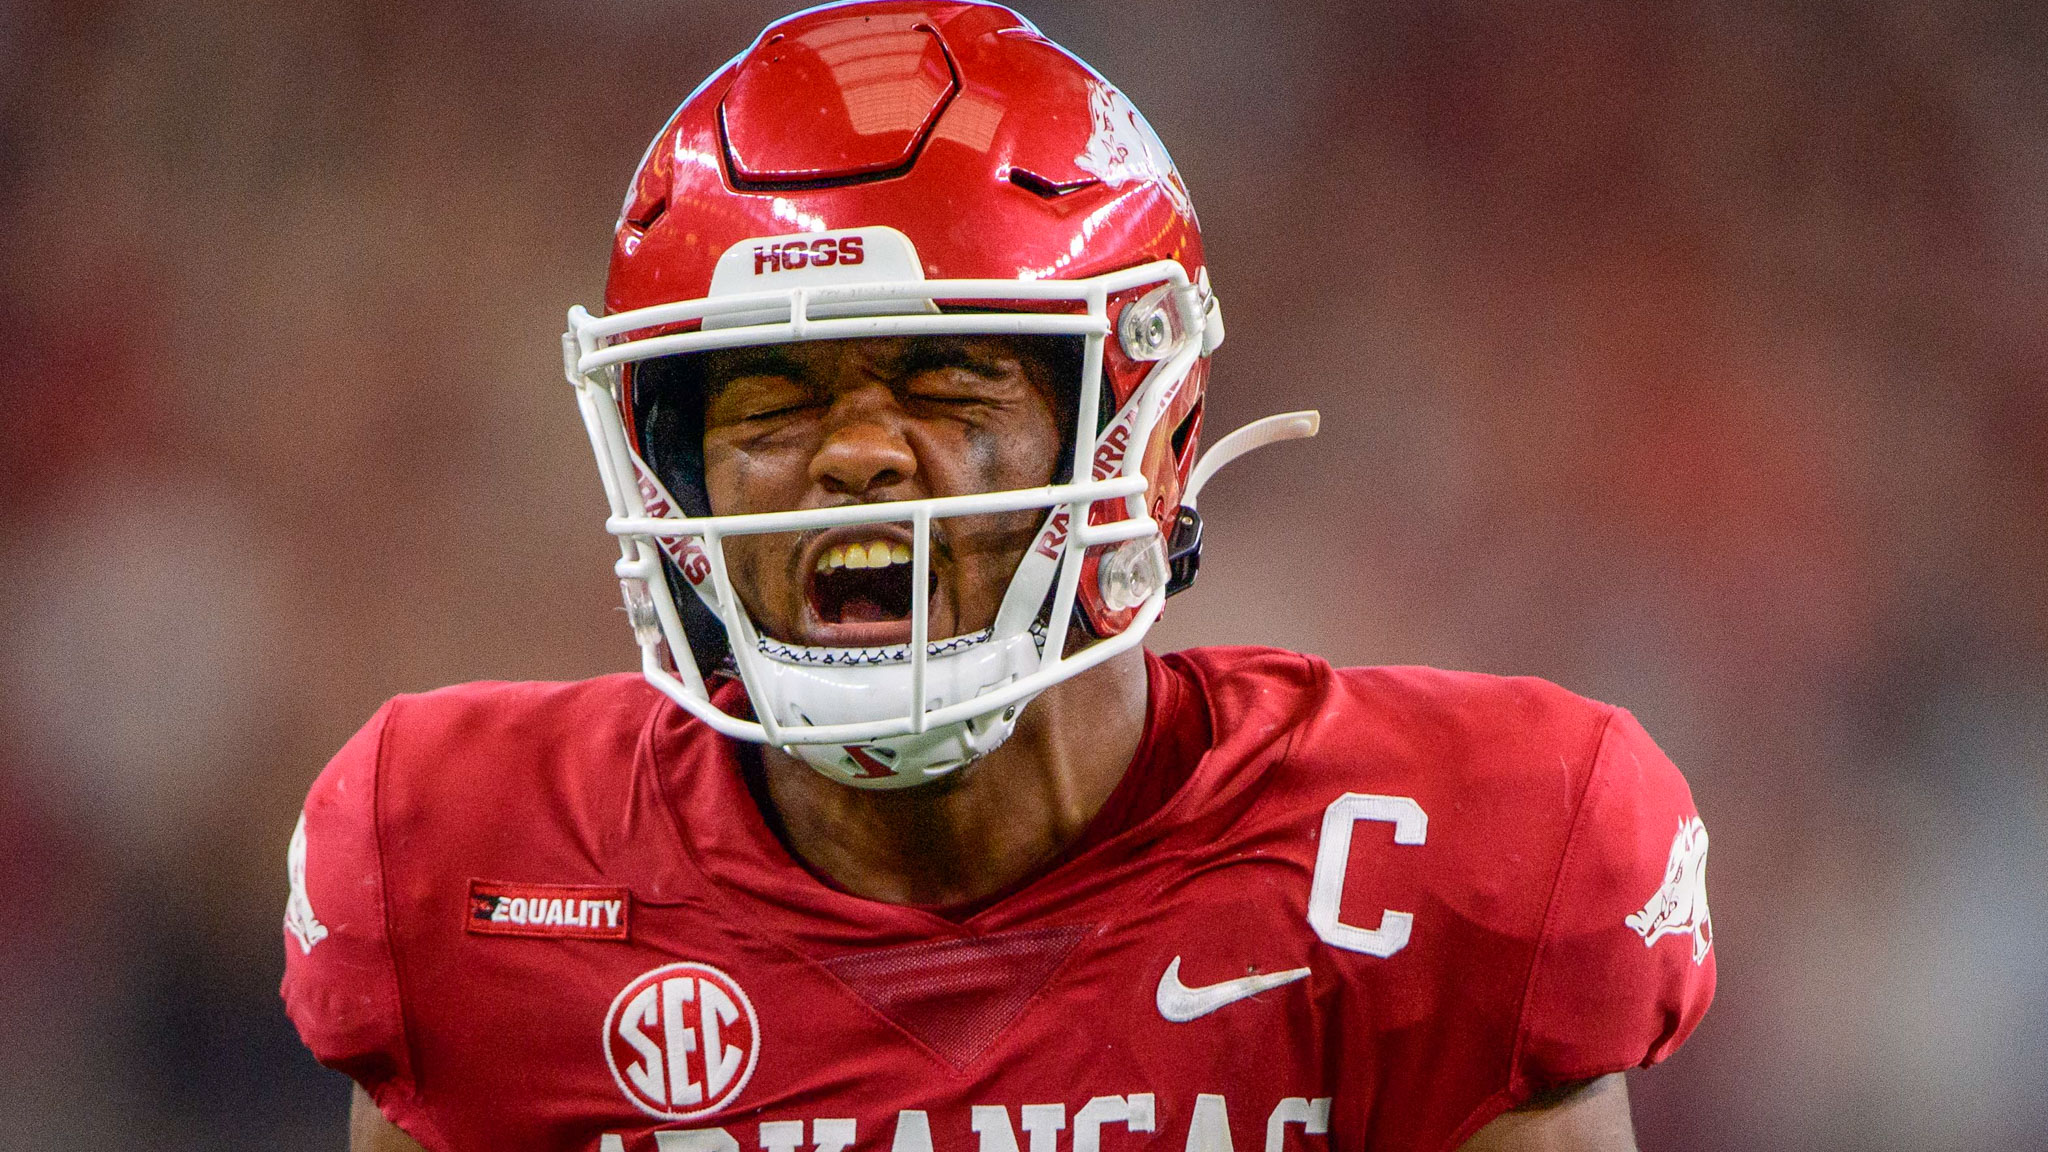 A Ray of Sunshine in Razorbacks’ Secondary Defections